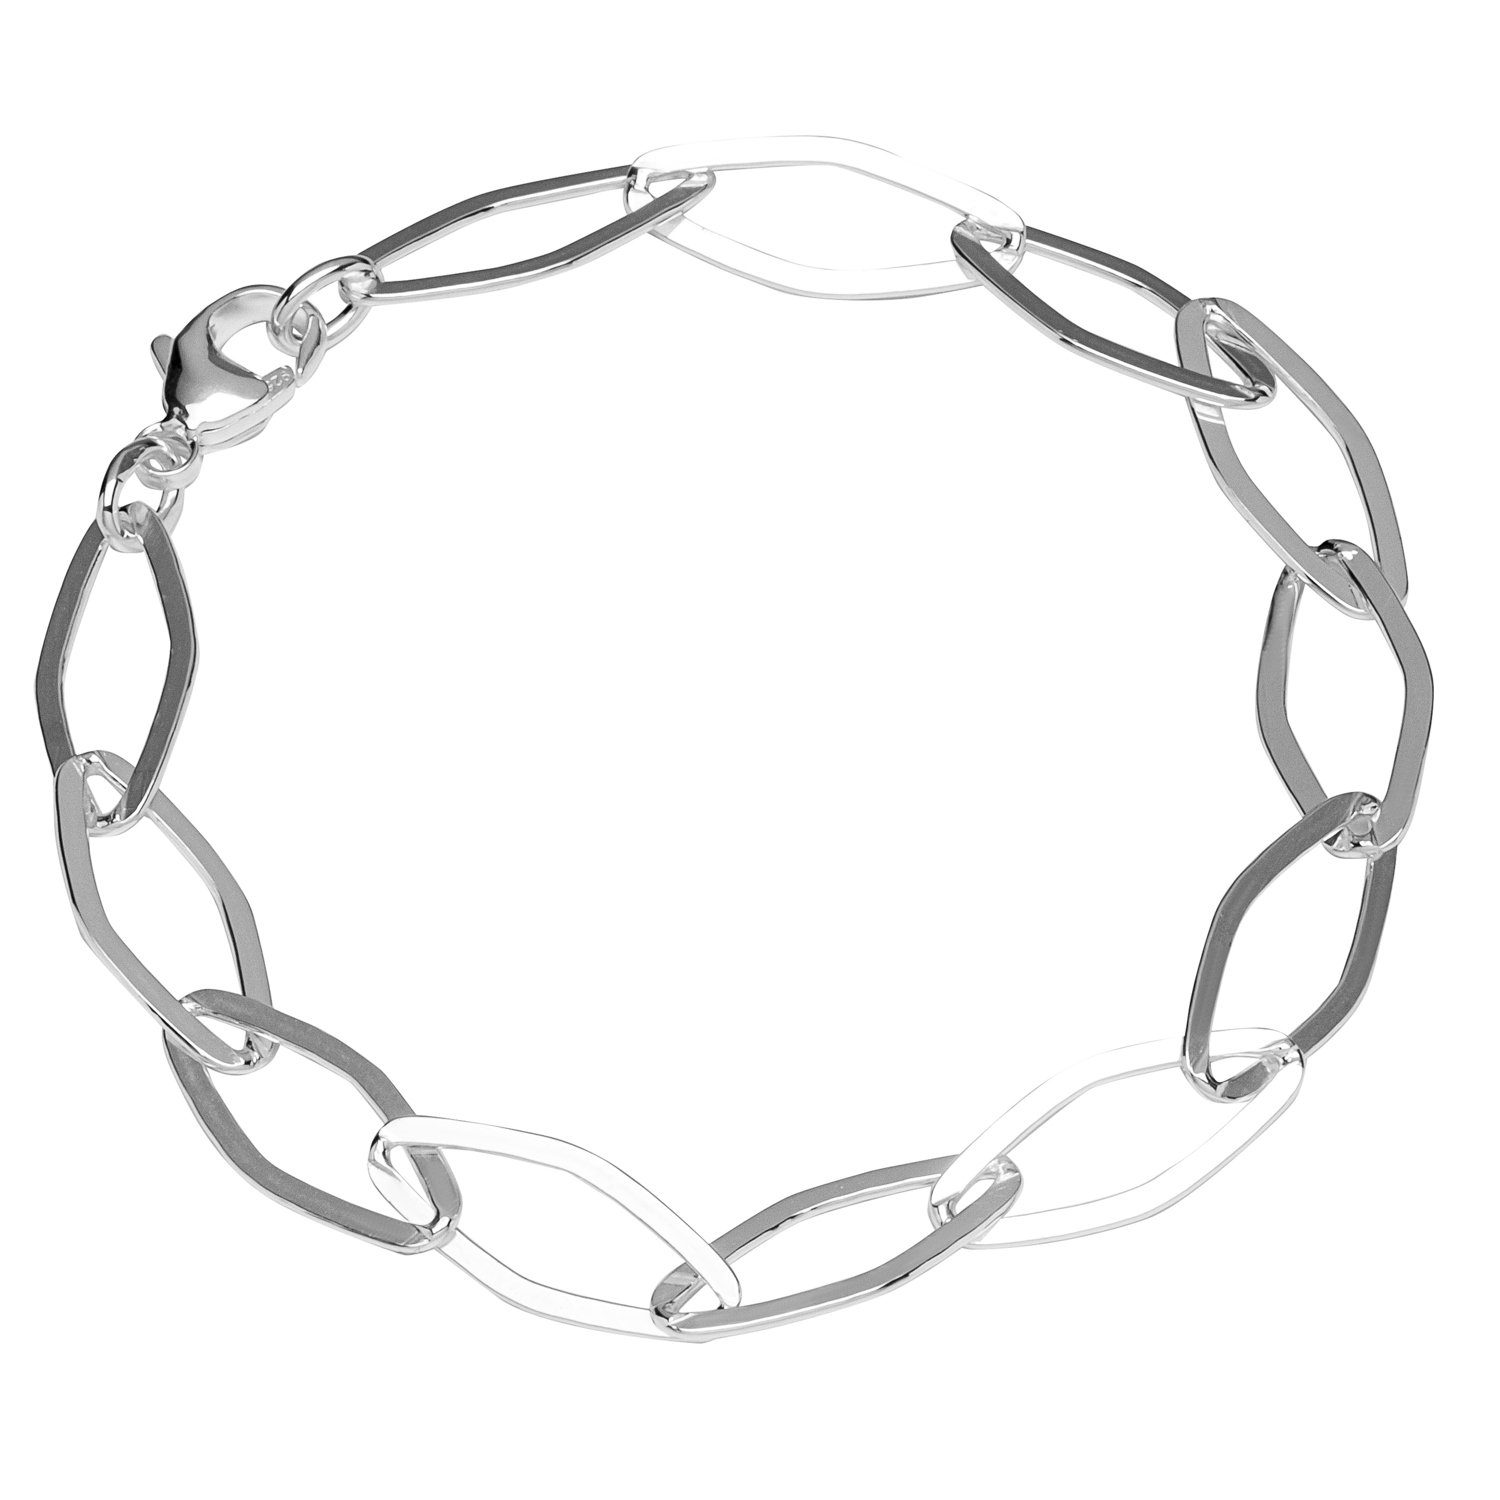 NKlaus Silberarmband Armband 925 Sterling Silber 19cm Ankerkette flach (1 Stück), Made in Germany